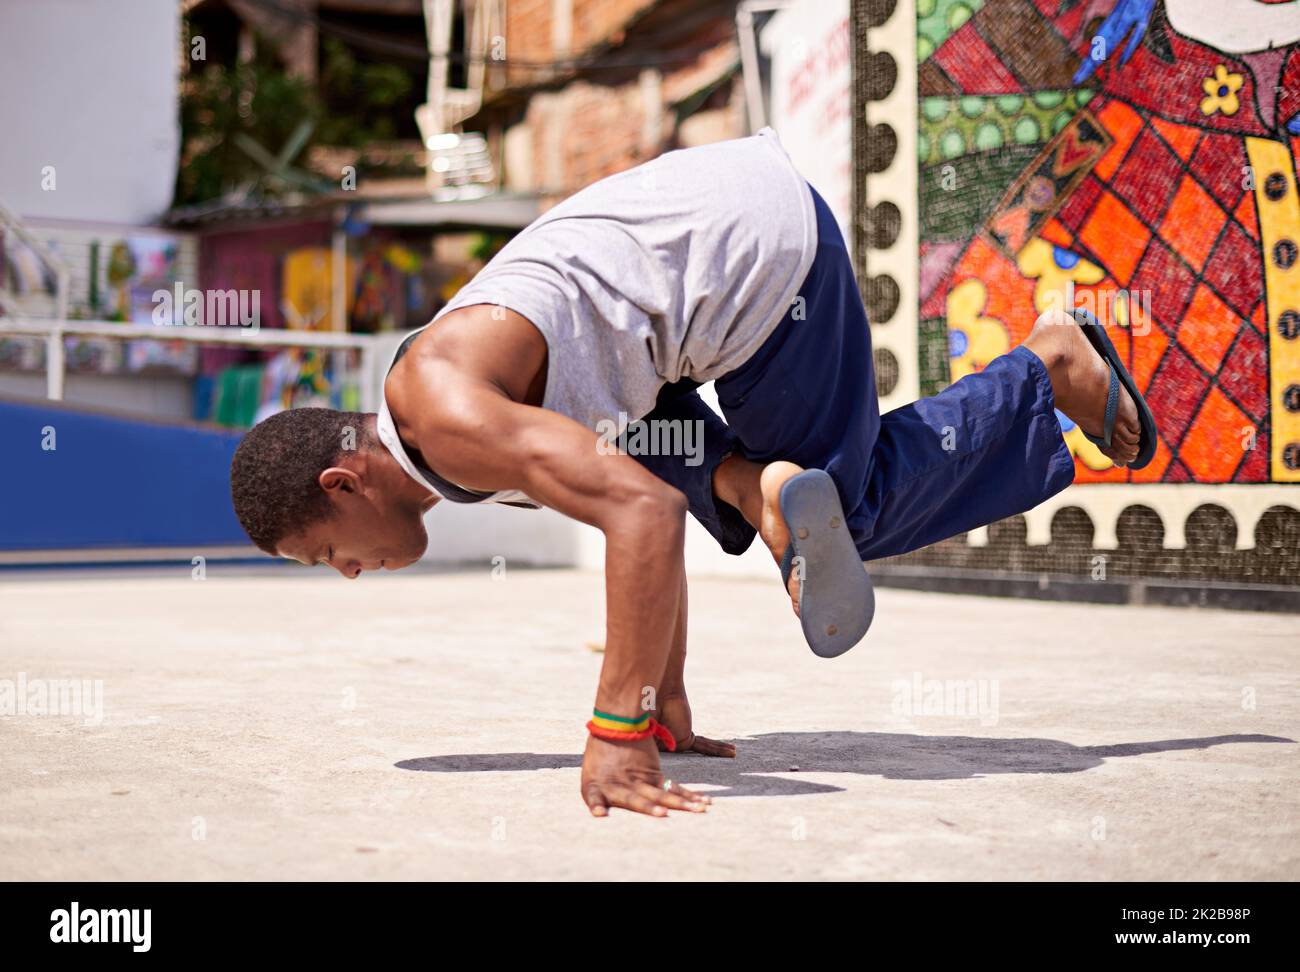 Capoeira culture. Low angle shot of a young male breakdancer in an urban setting. Stock Photo